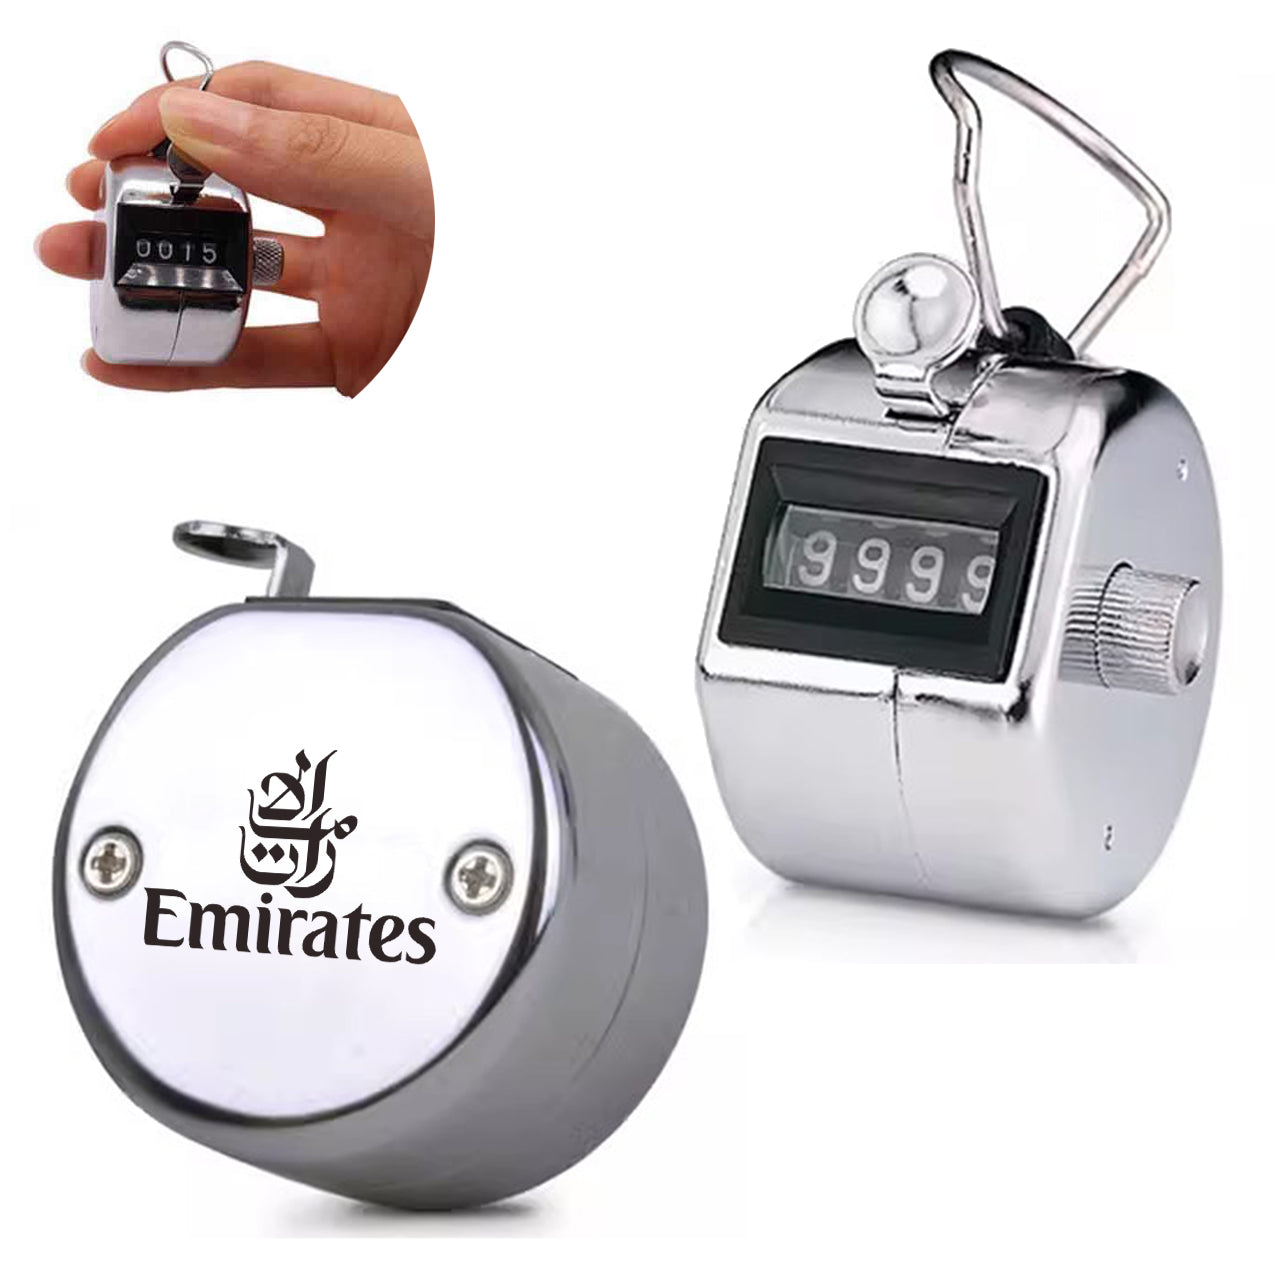 Emirates Airlines Designed Metal Handheld Counters